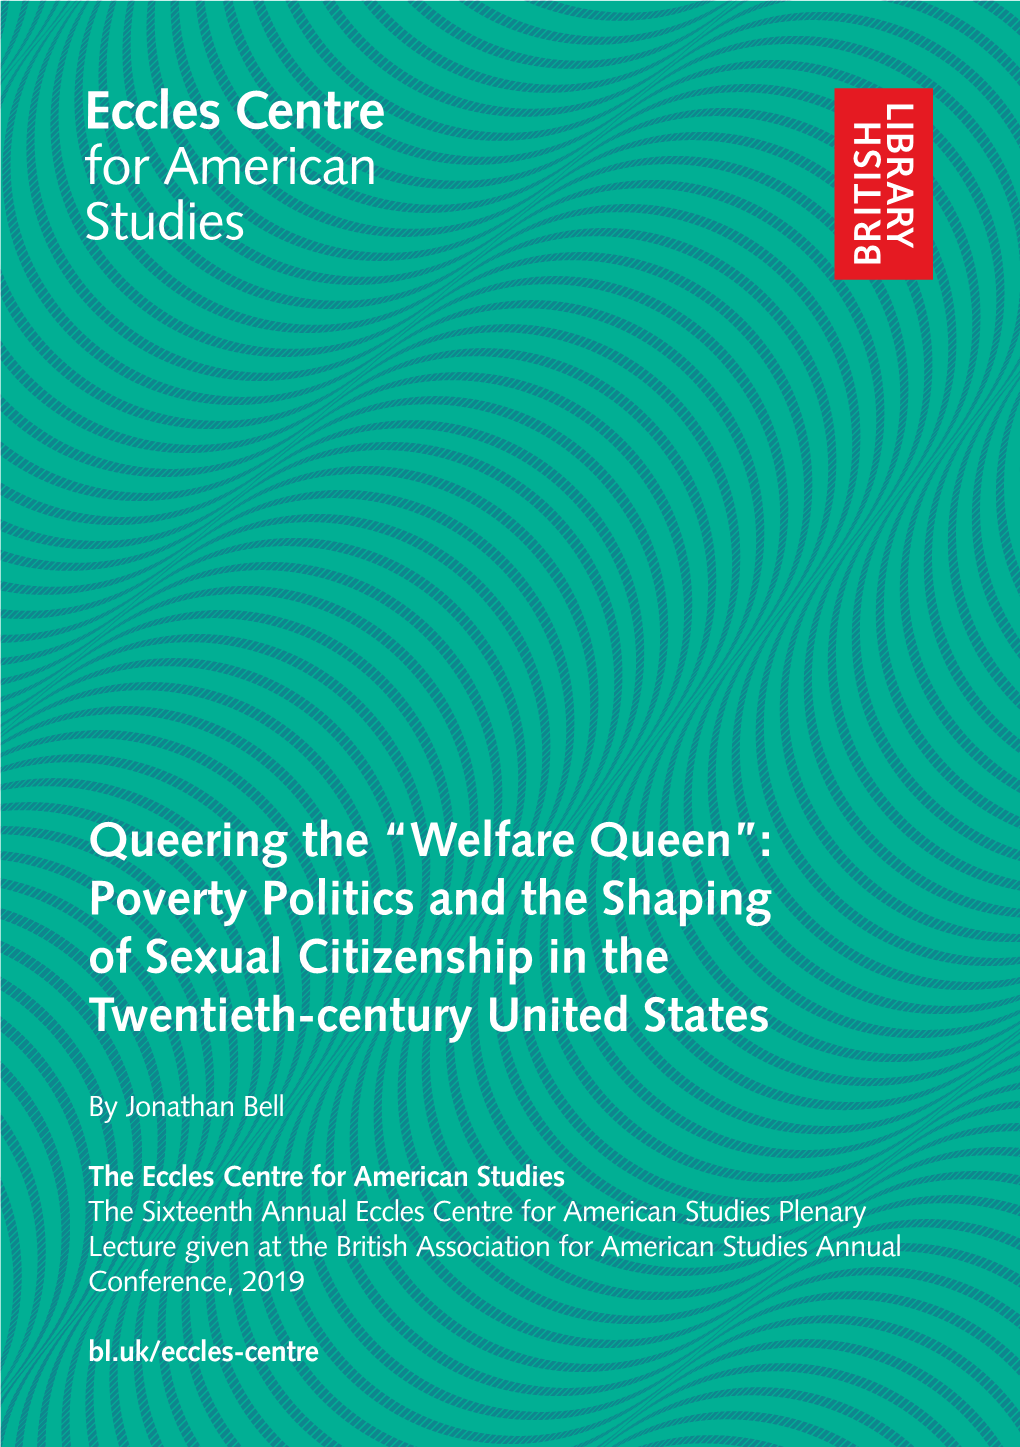 Welfare Queen”: Poverty Politics and the Shaping of Sexual Citizenship in the Twentieth-Century United States